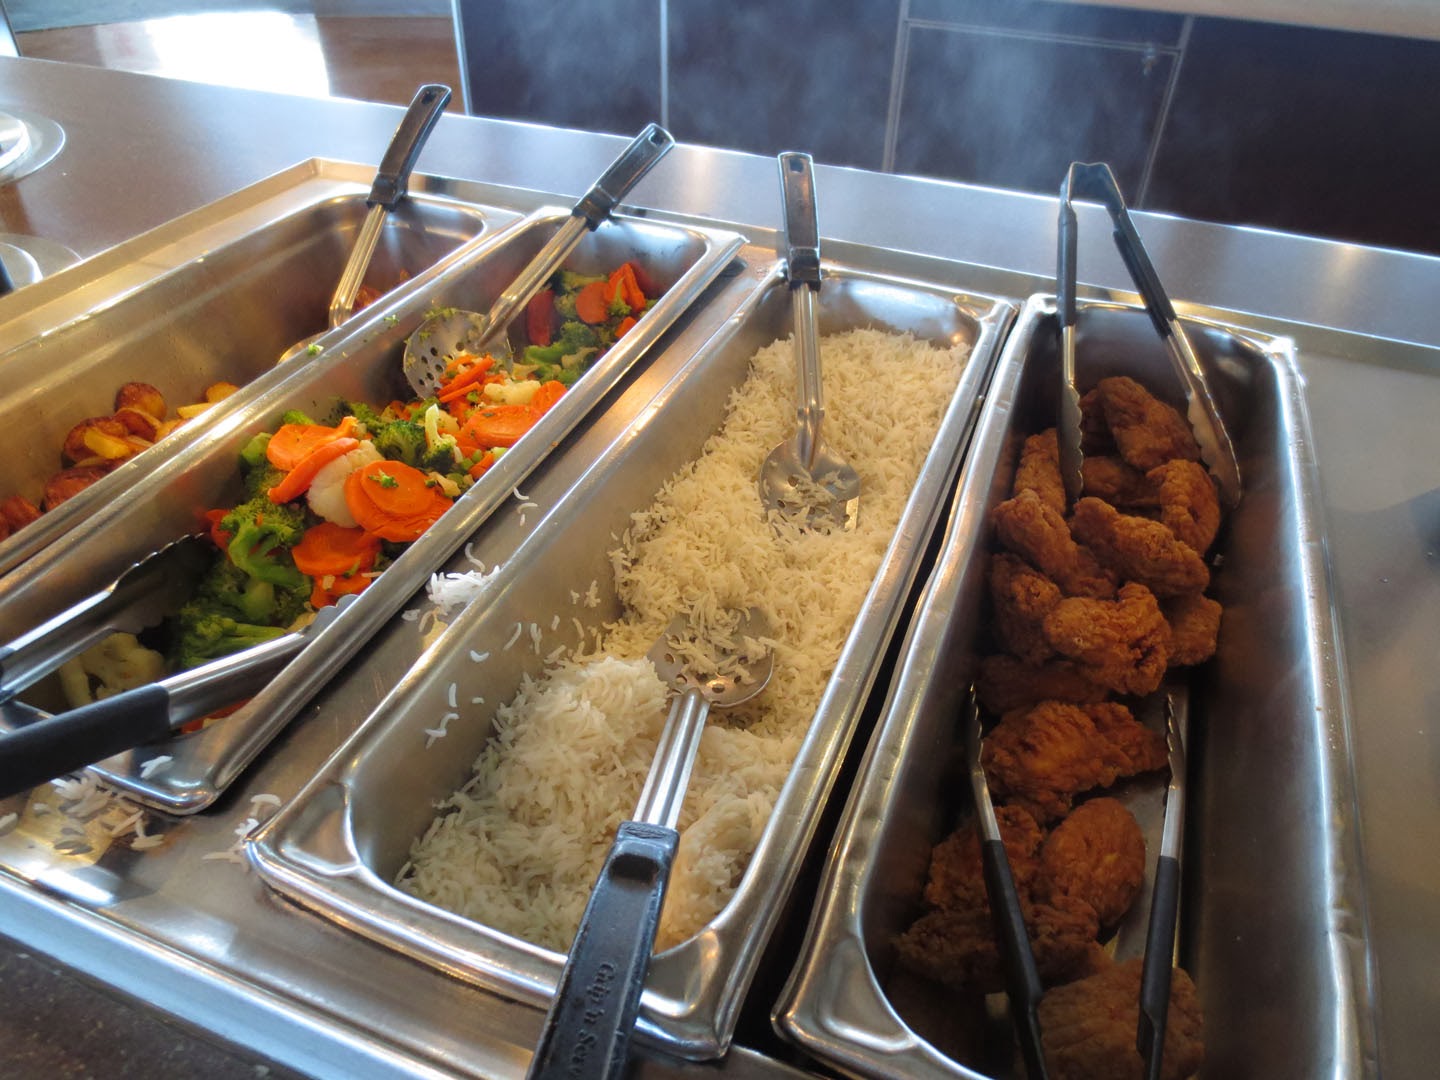 Chicken fingers, veggies and rice, Pacific Buffent, BC Ferries